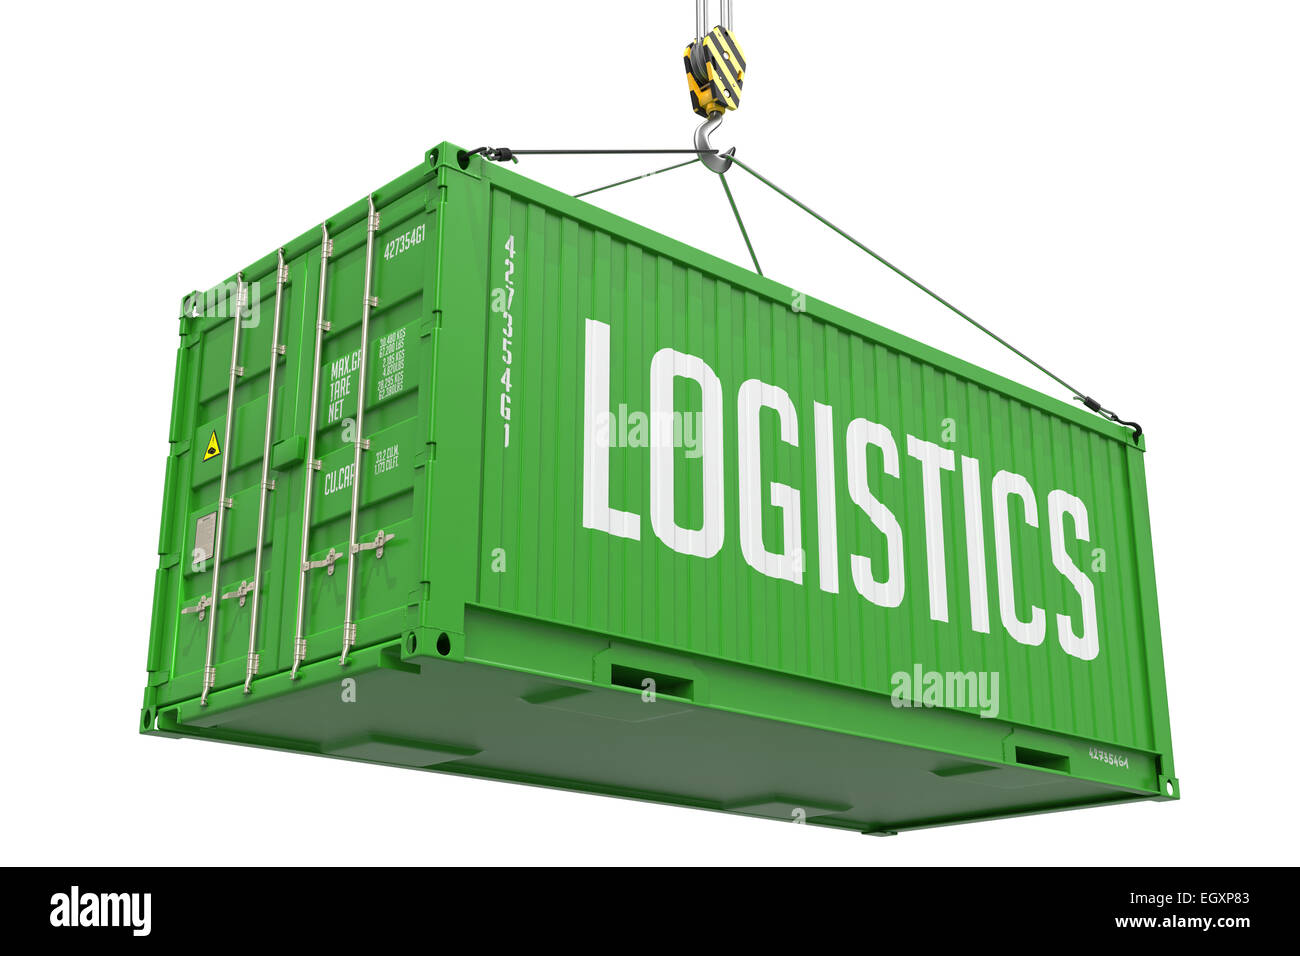 Logistics - Green Hanging Cargo Container. Stock Photo